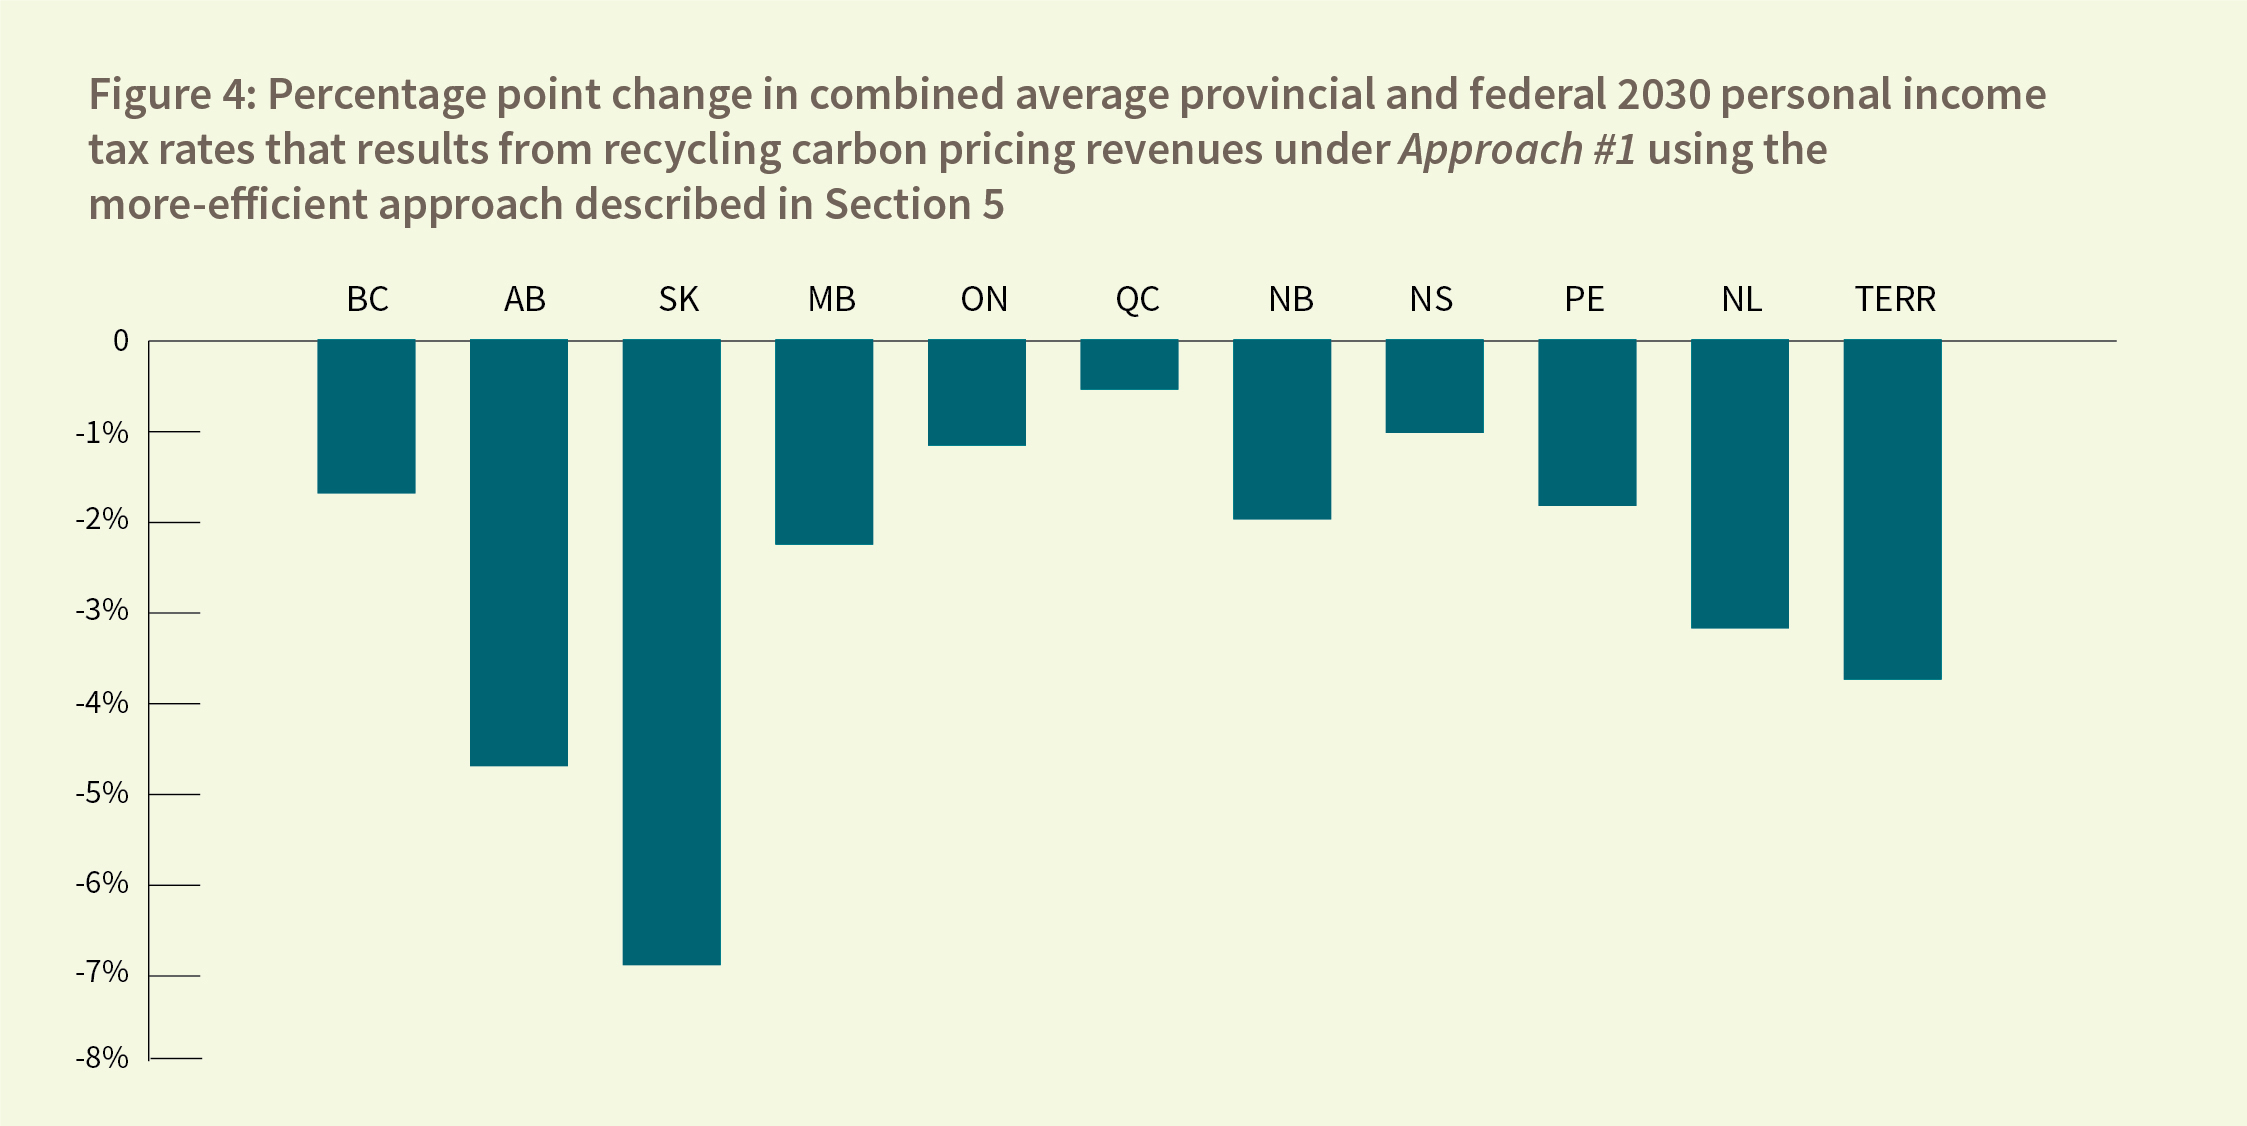 Figure 4: Percentage point change in combined average provincial and federal 2030 personal income tax rates that results from recycling carbon pricing revenues under Approach #1 using the more-eicient approach described in Section 5